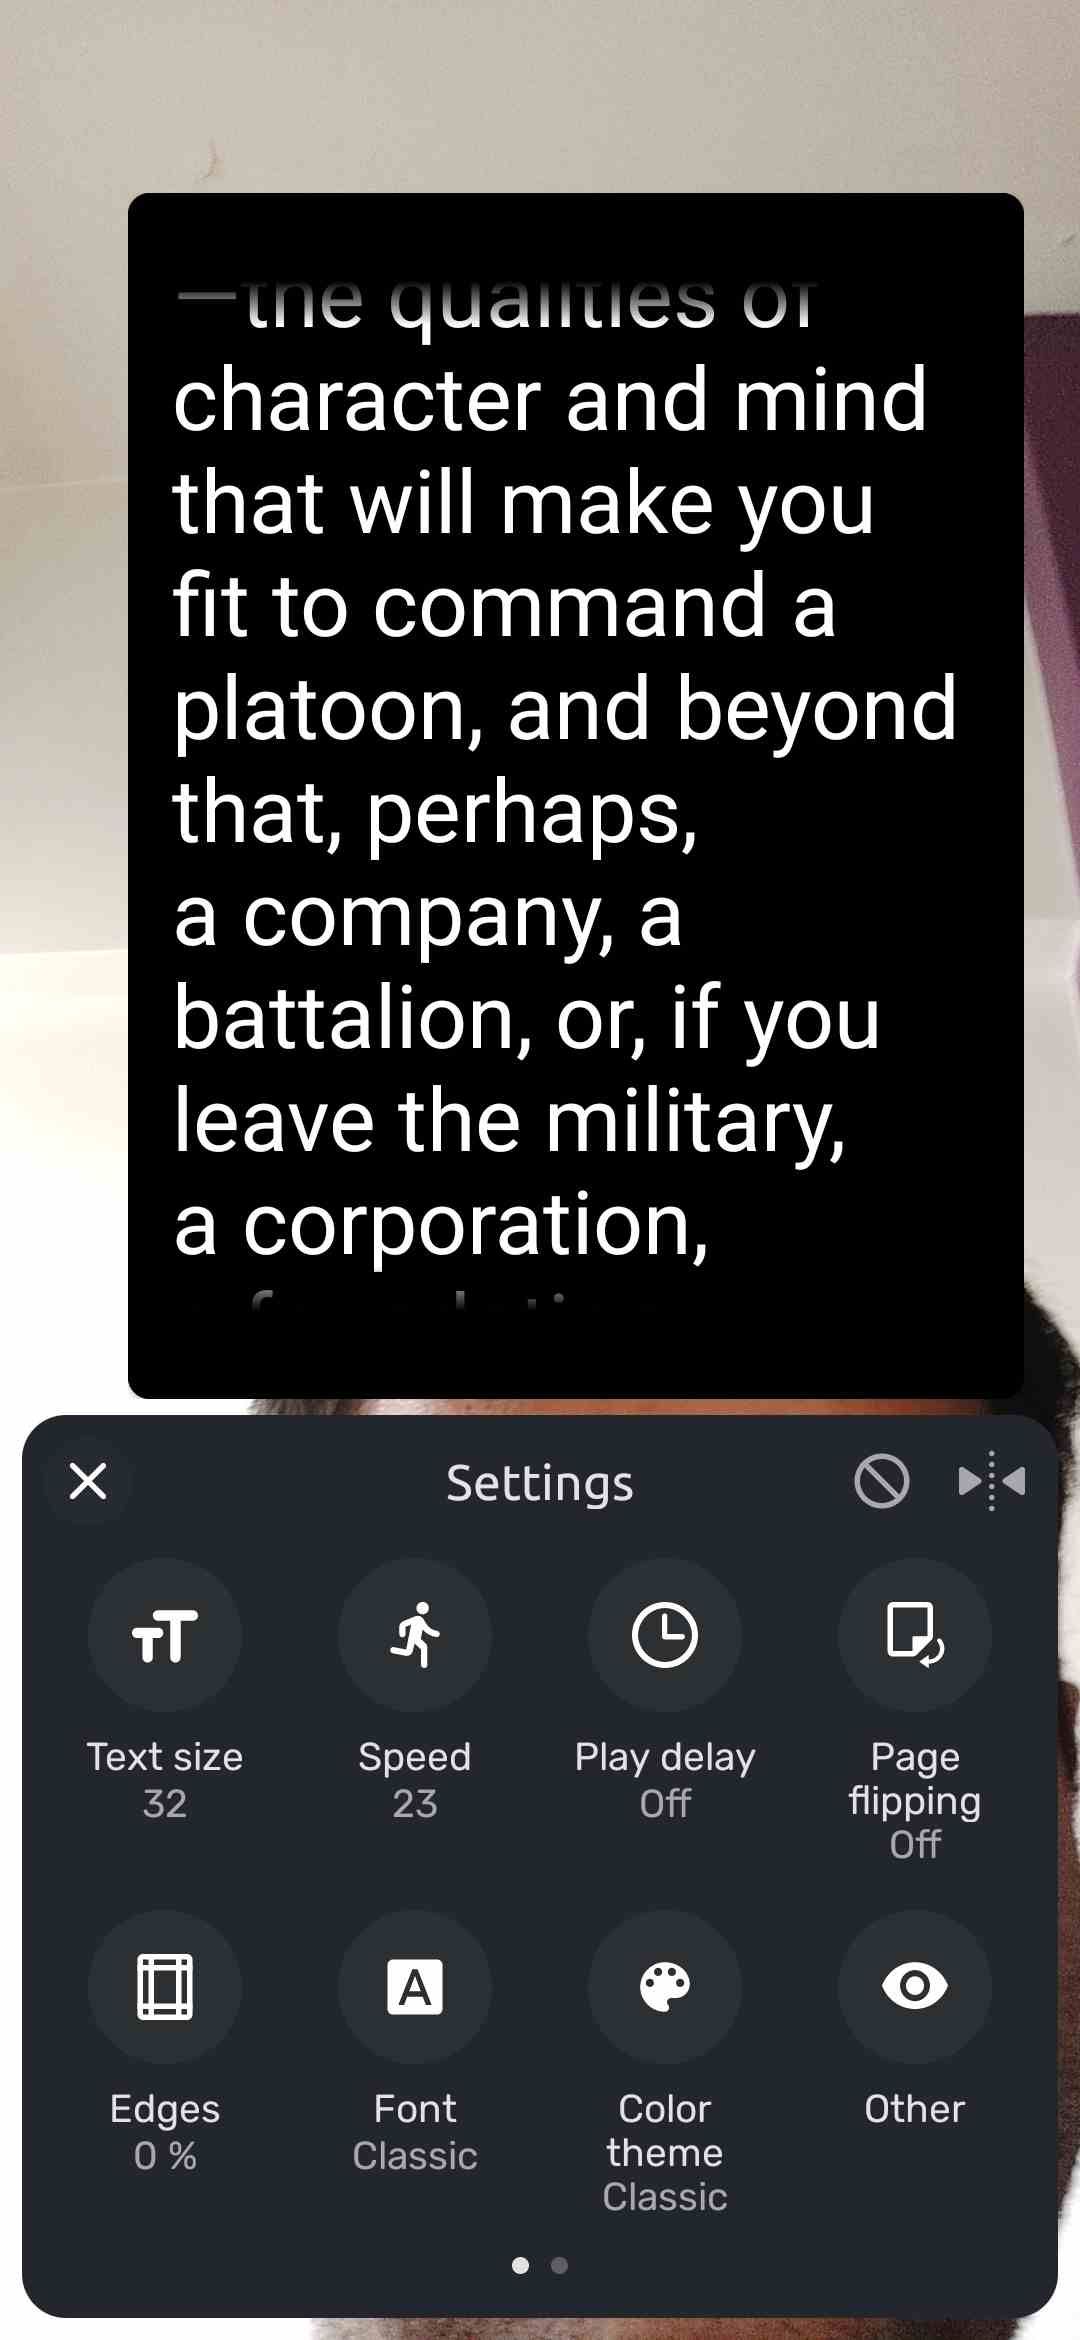 You can adjust the settings of the teleprompter widget in Speechway to change any view to your liking